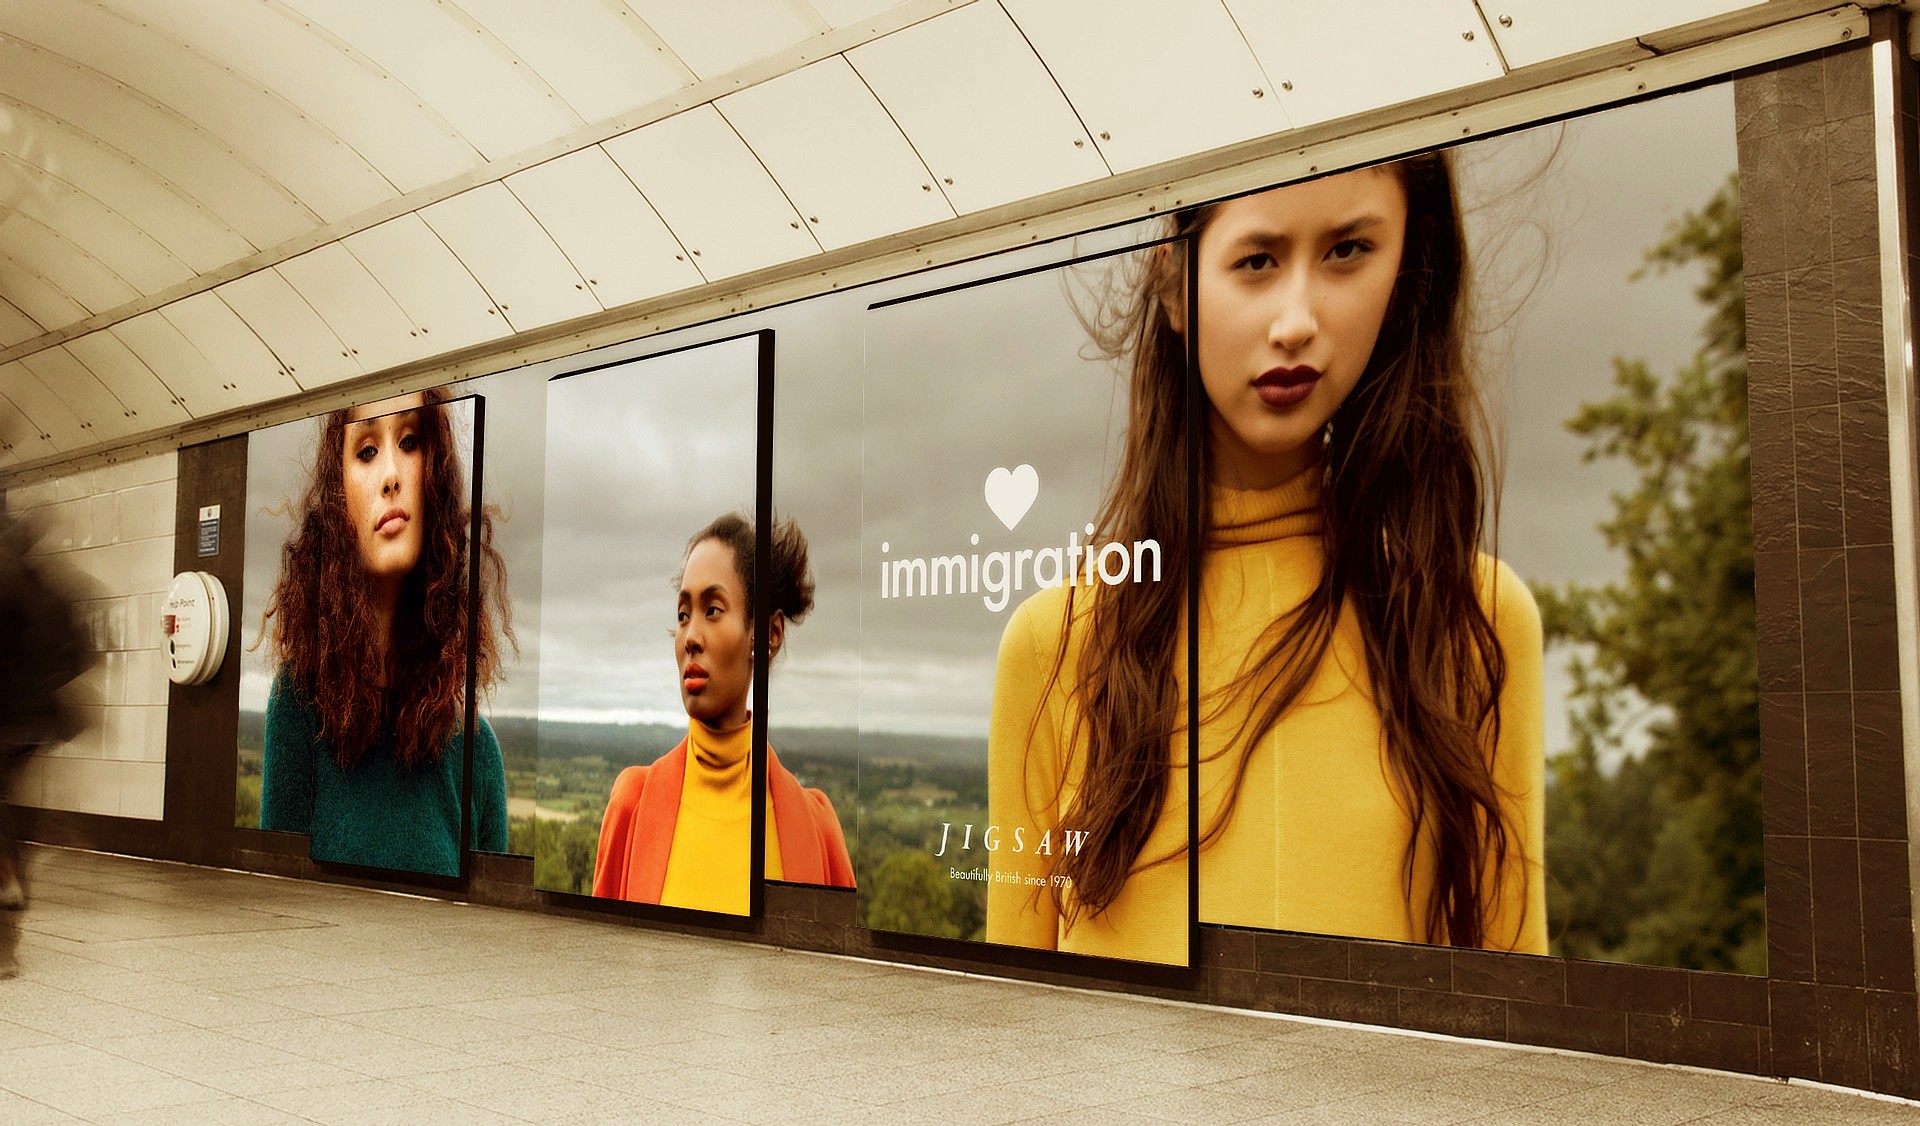 JIGSAW’S LOVE IMMIGRANT CAMPAIGN